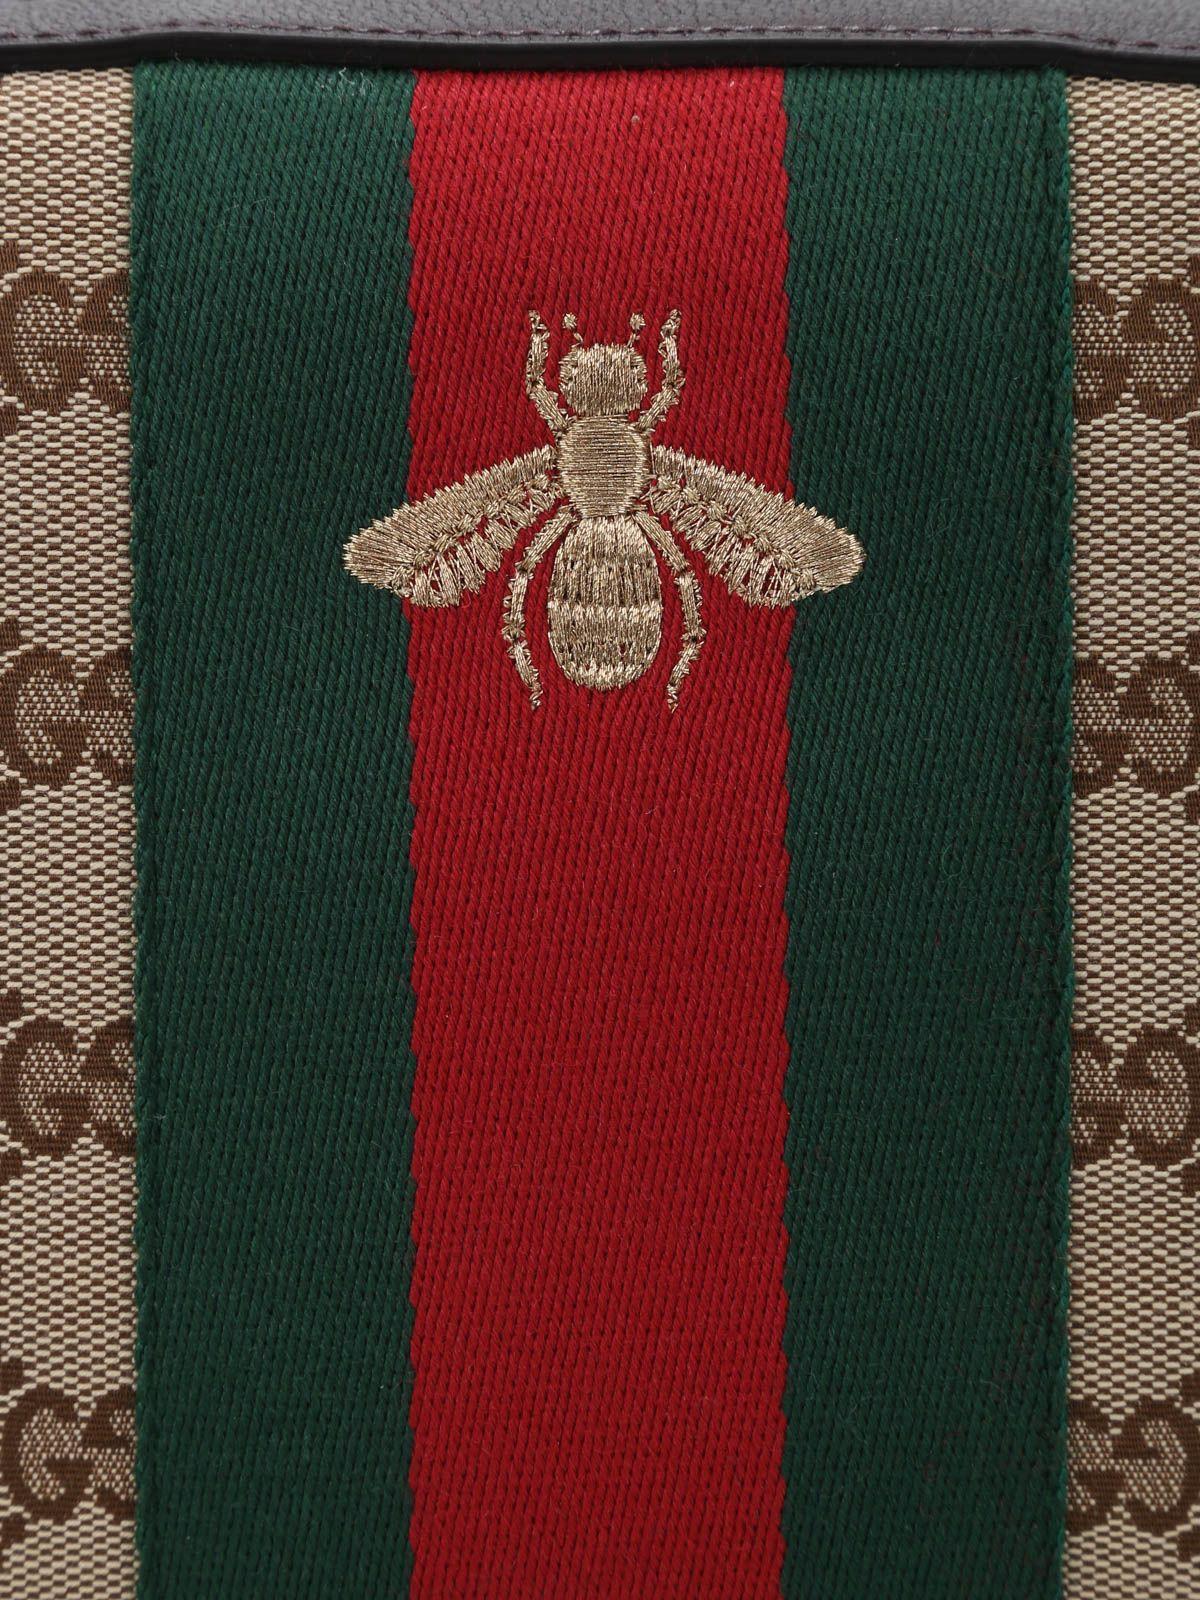 Gucci Bee Logo - Gucci embroidery GG canvas bag body bags